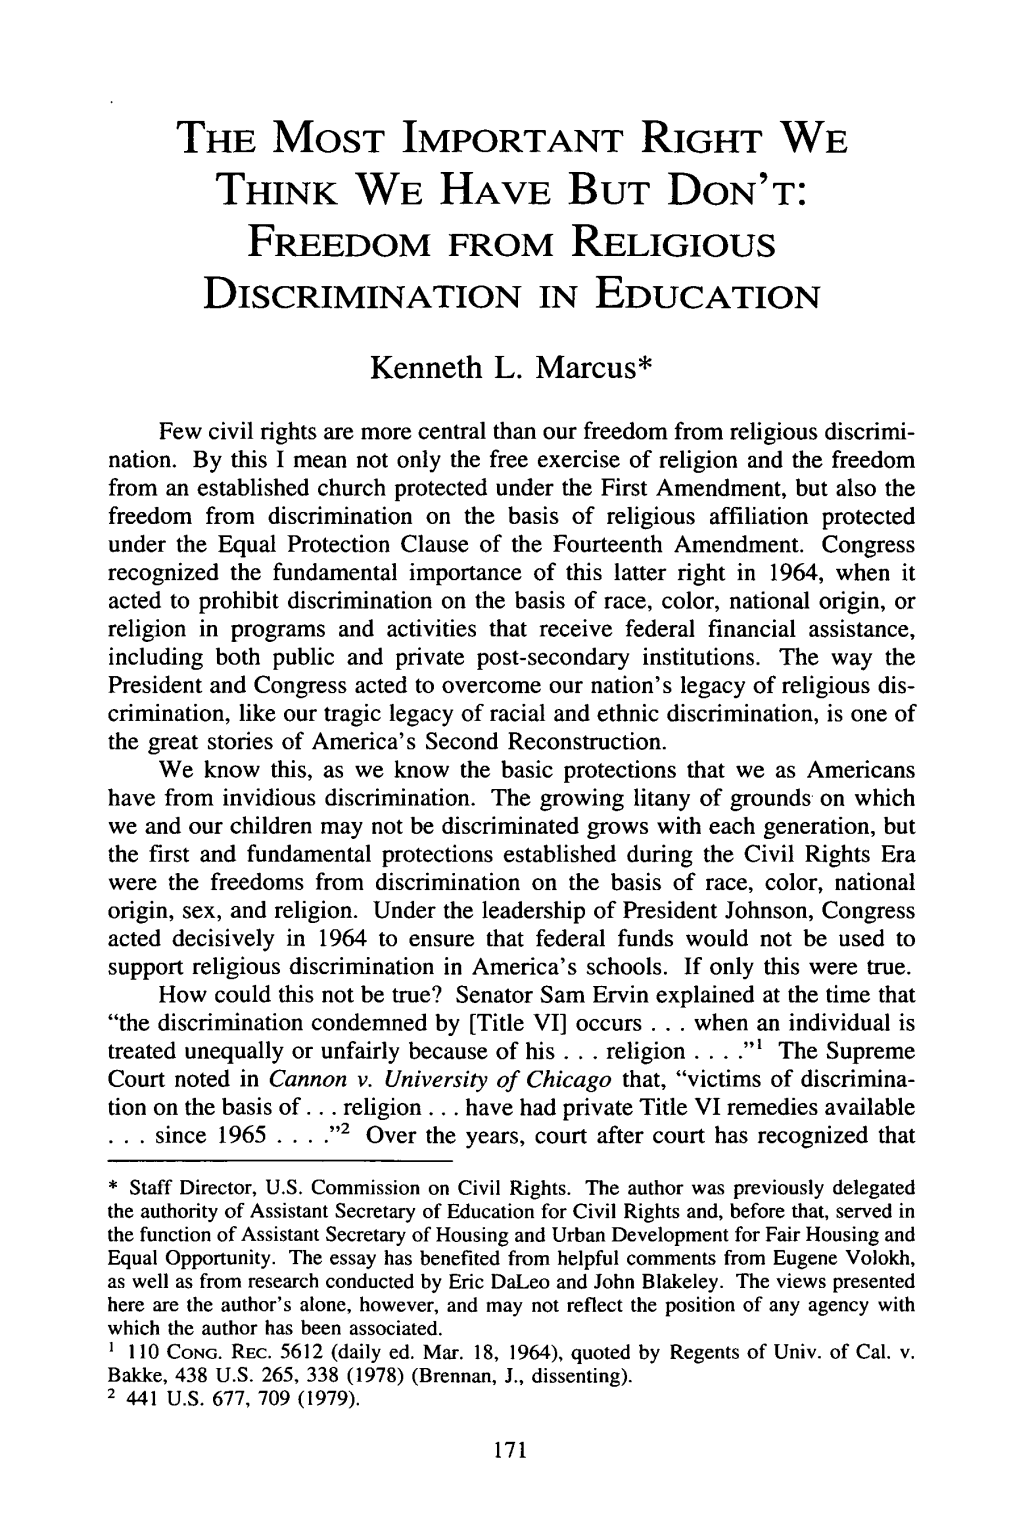 Freedom from Religious Discrimination in Education